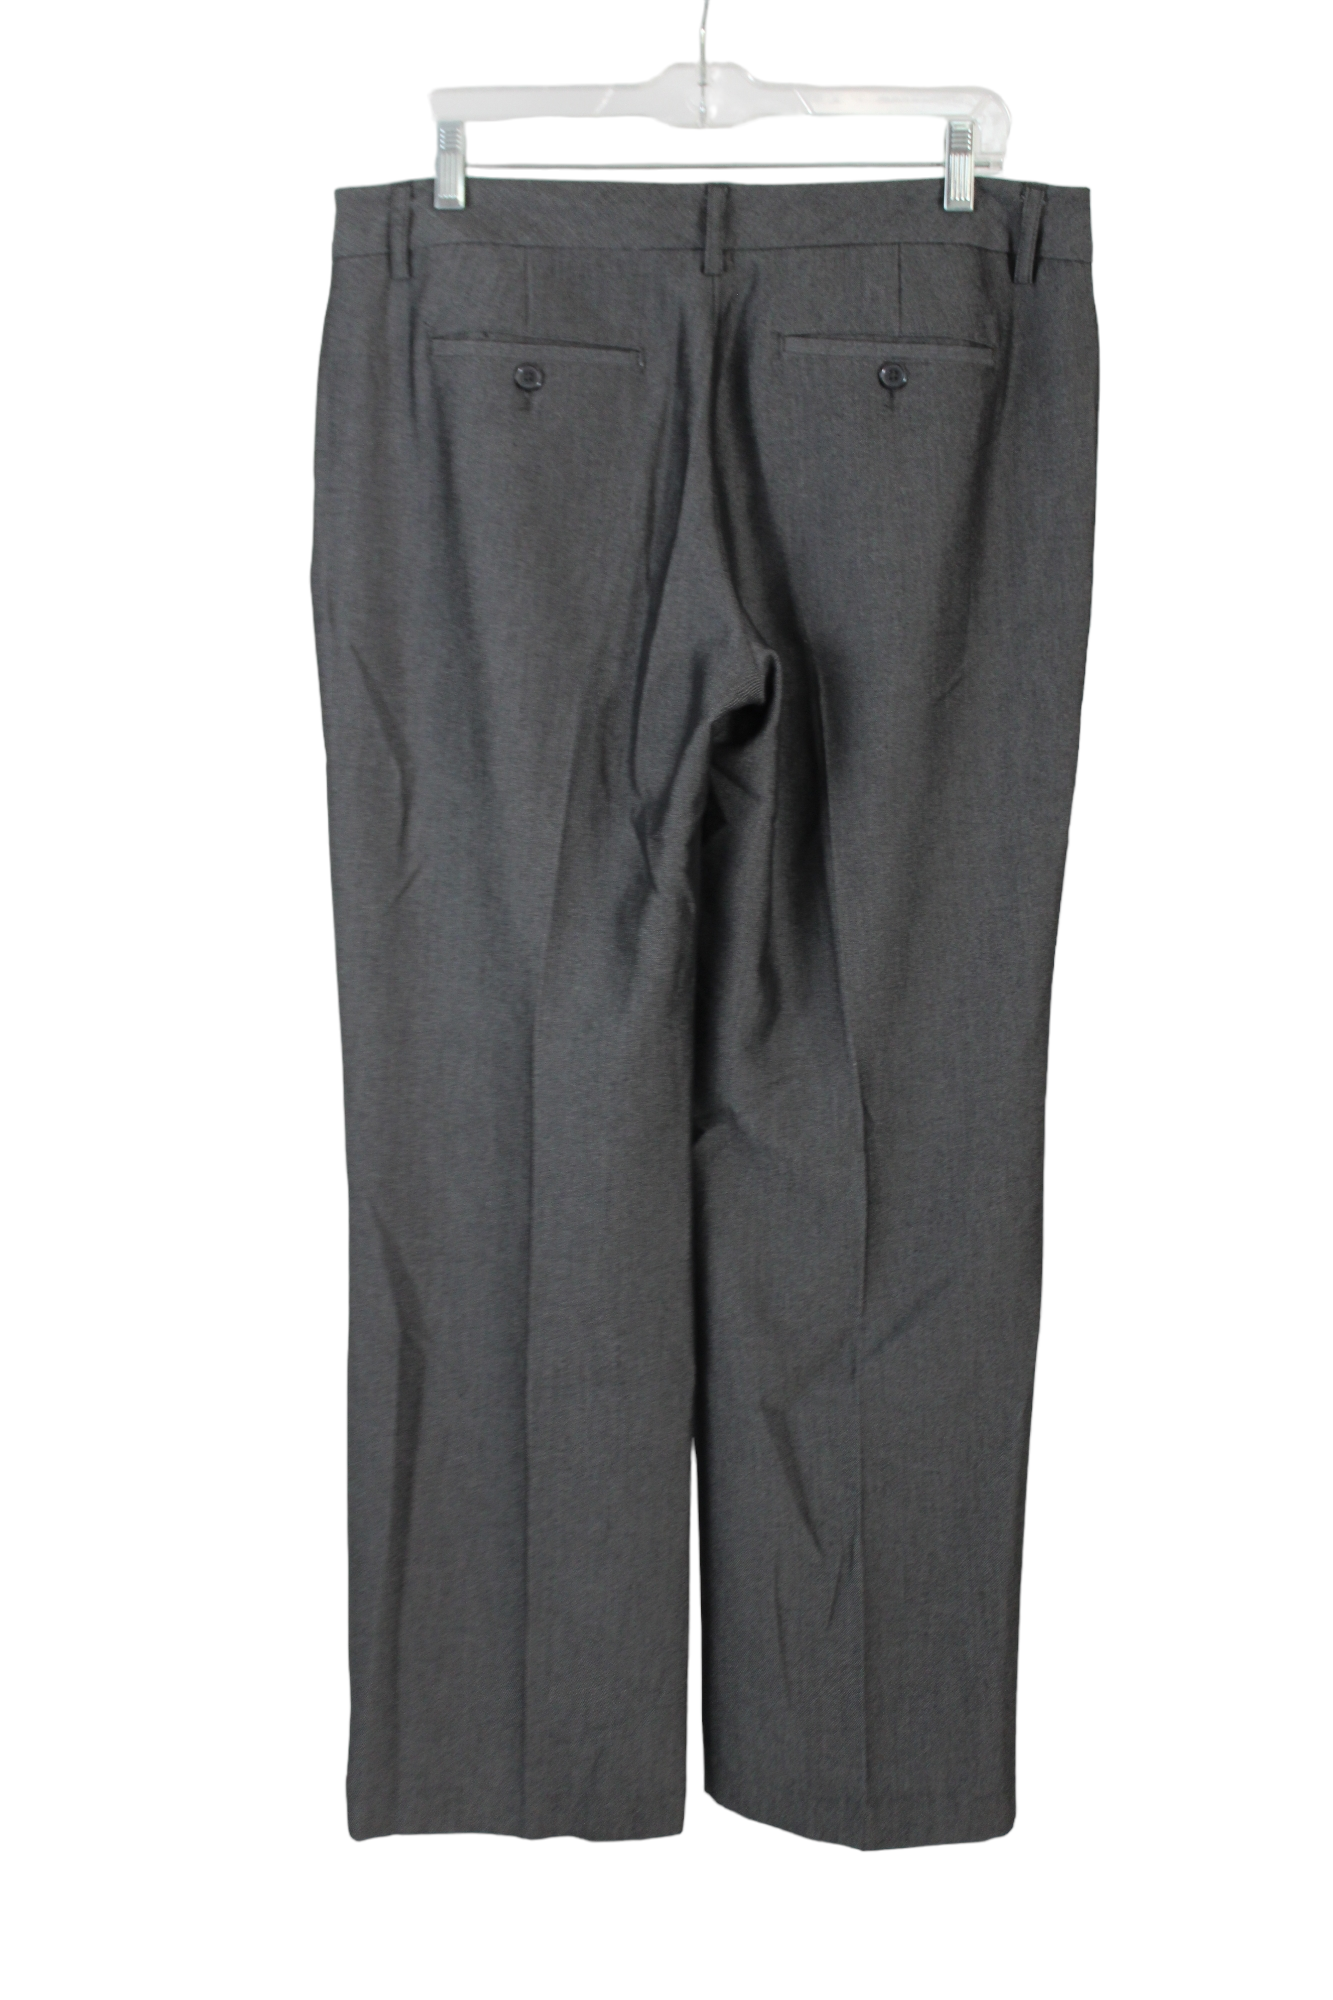 Express Gray Trousers | 10